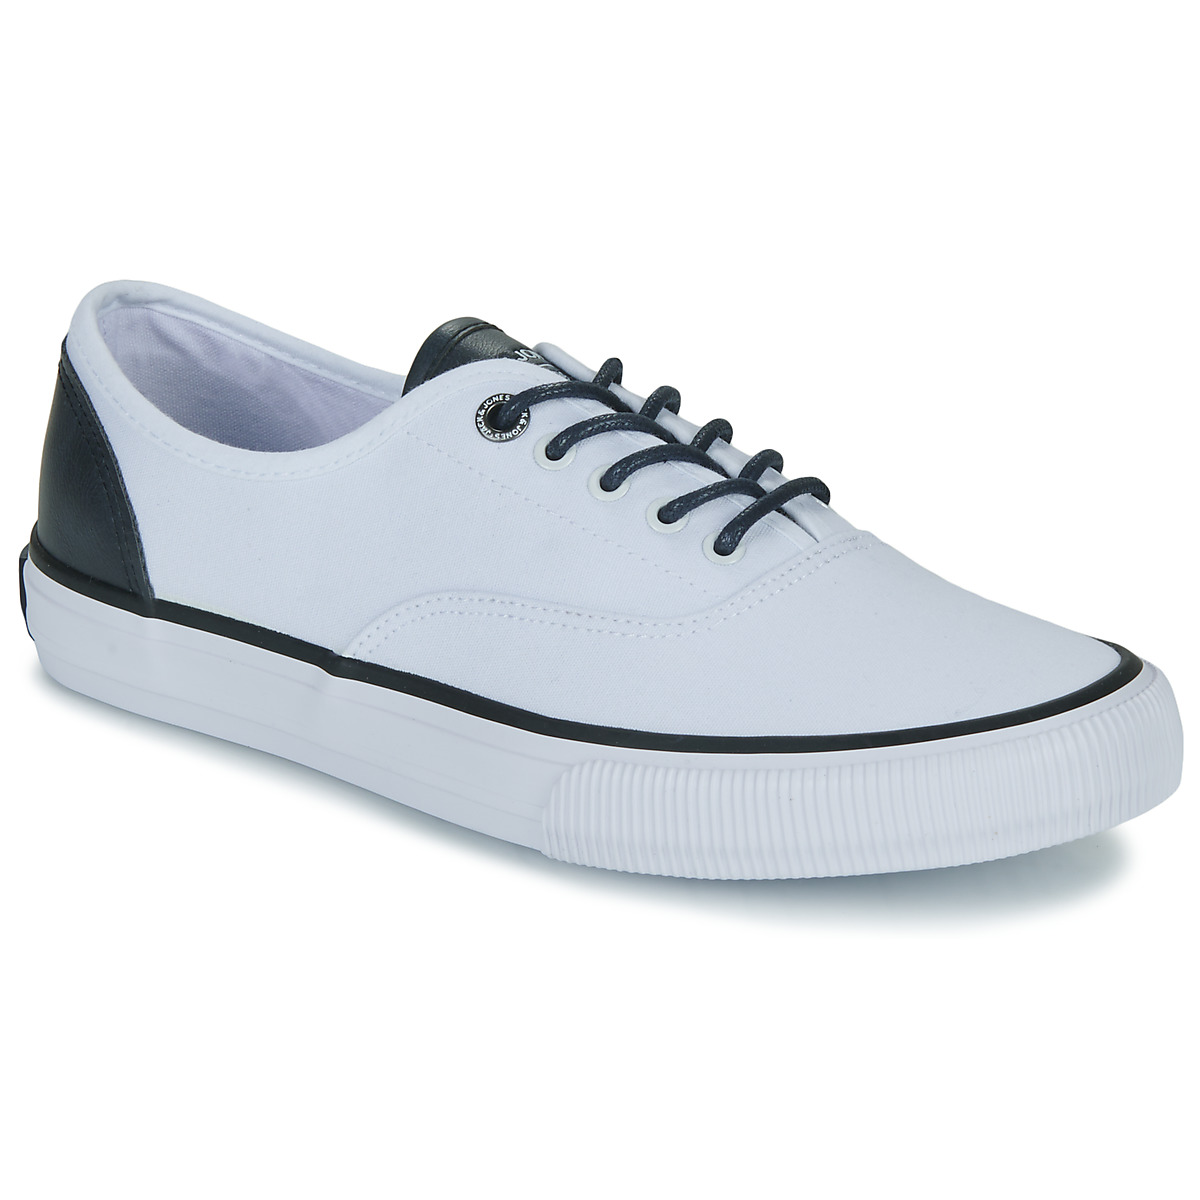 Jack & Jones CURTIS CANVAS White - Free | Spartoo UK - Shoes Low top trainers Men £ 31.19